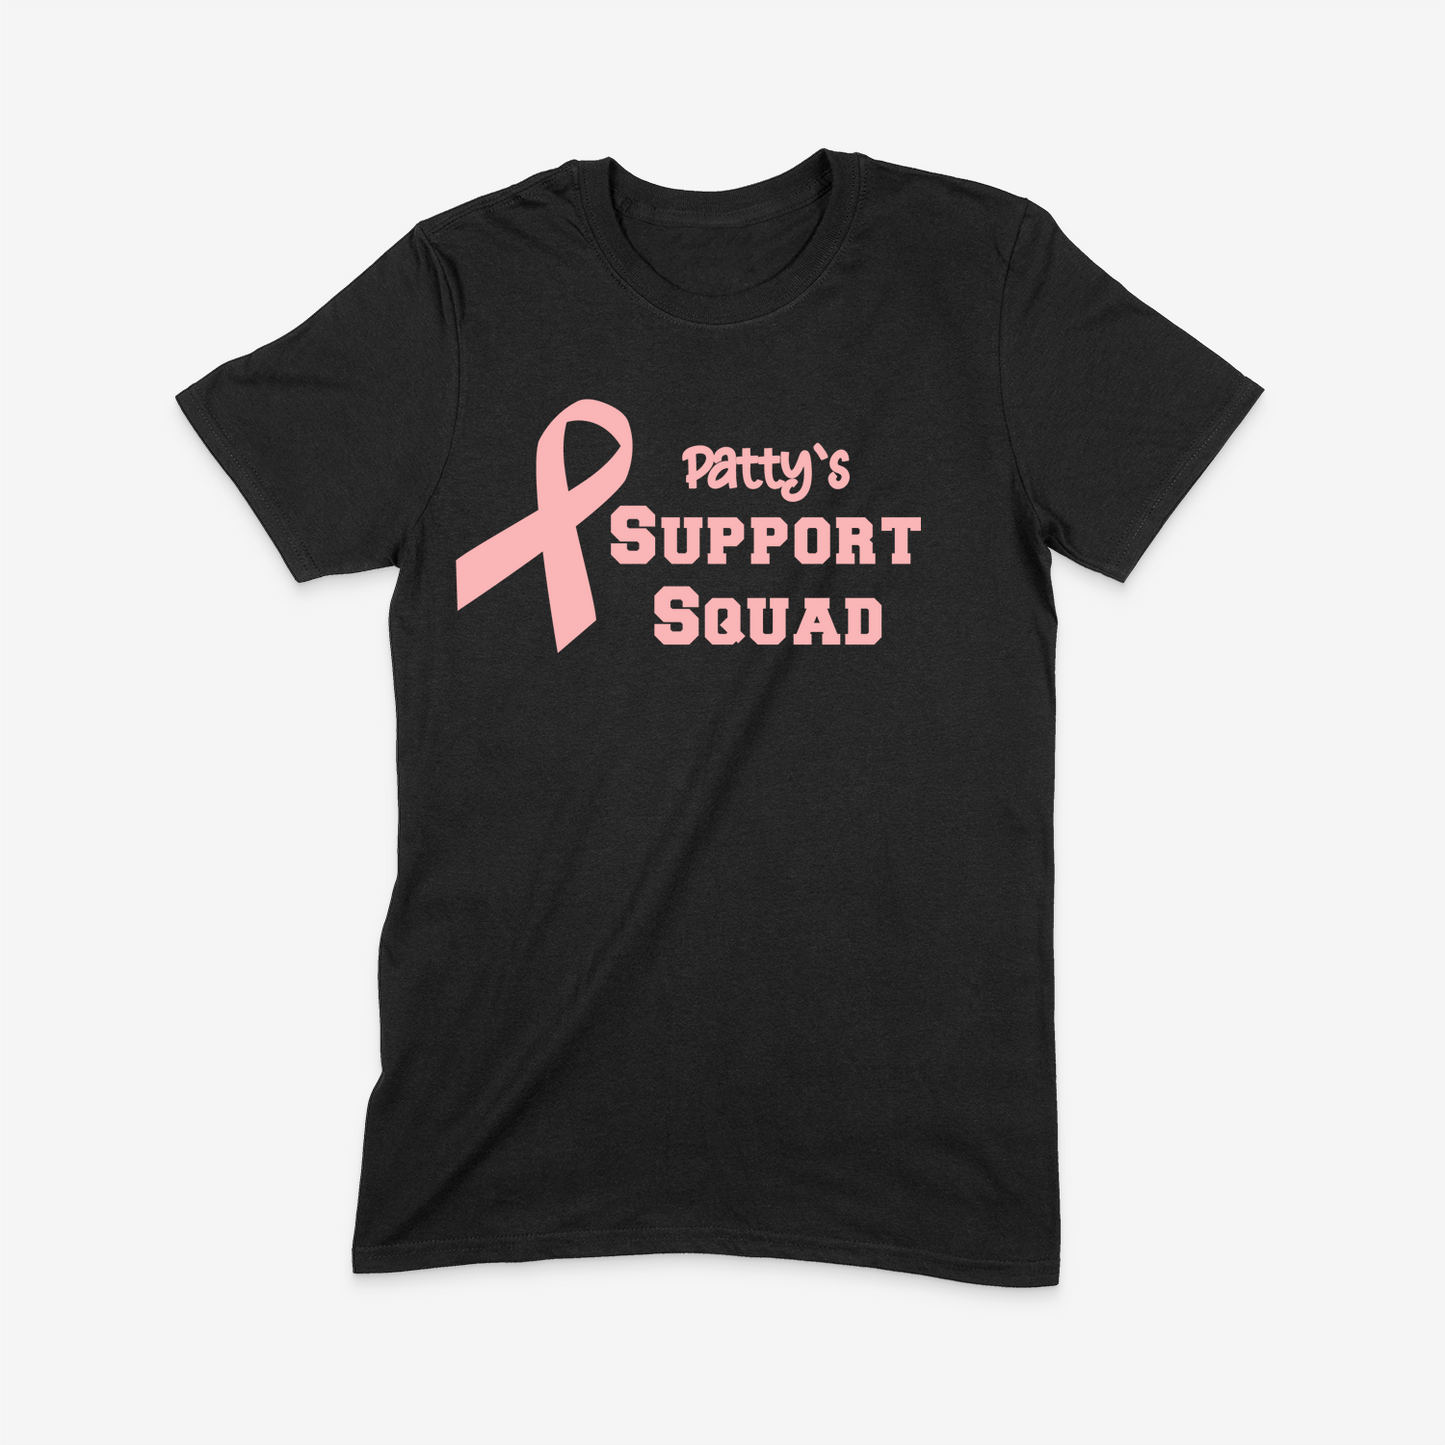 Patty's Support Squad Short Sleeve